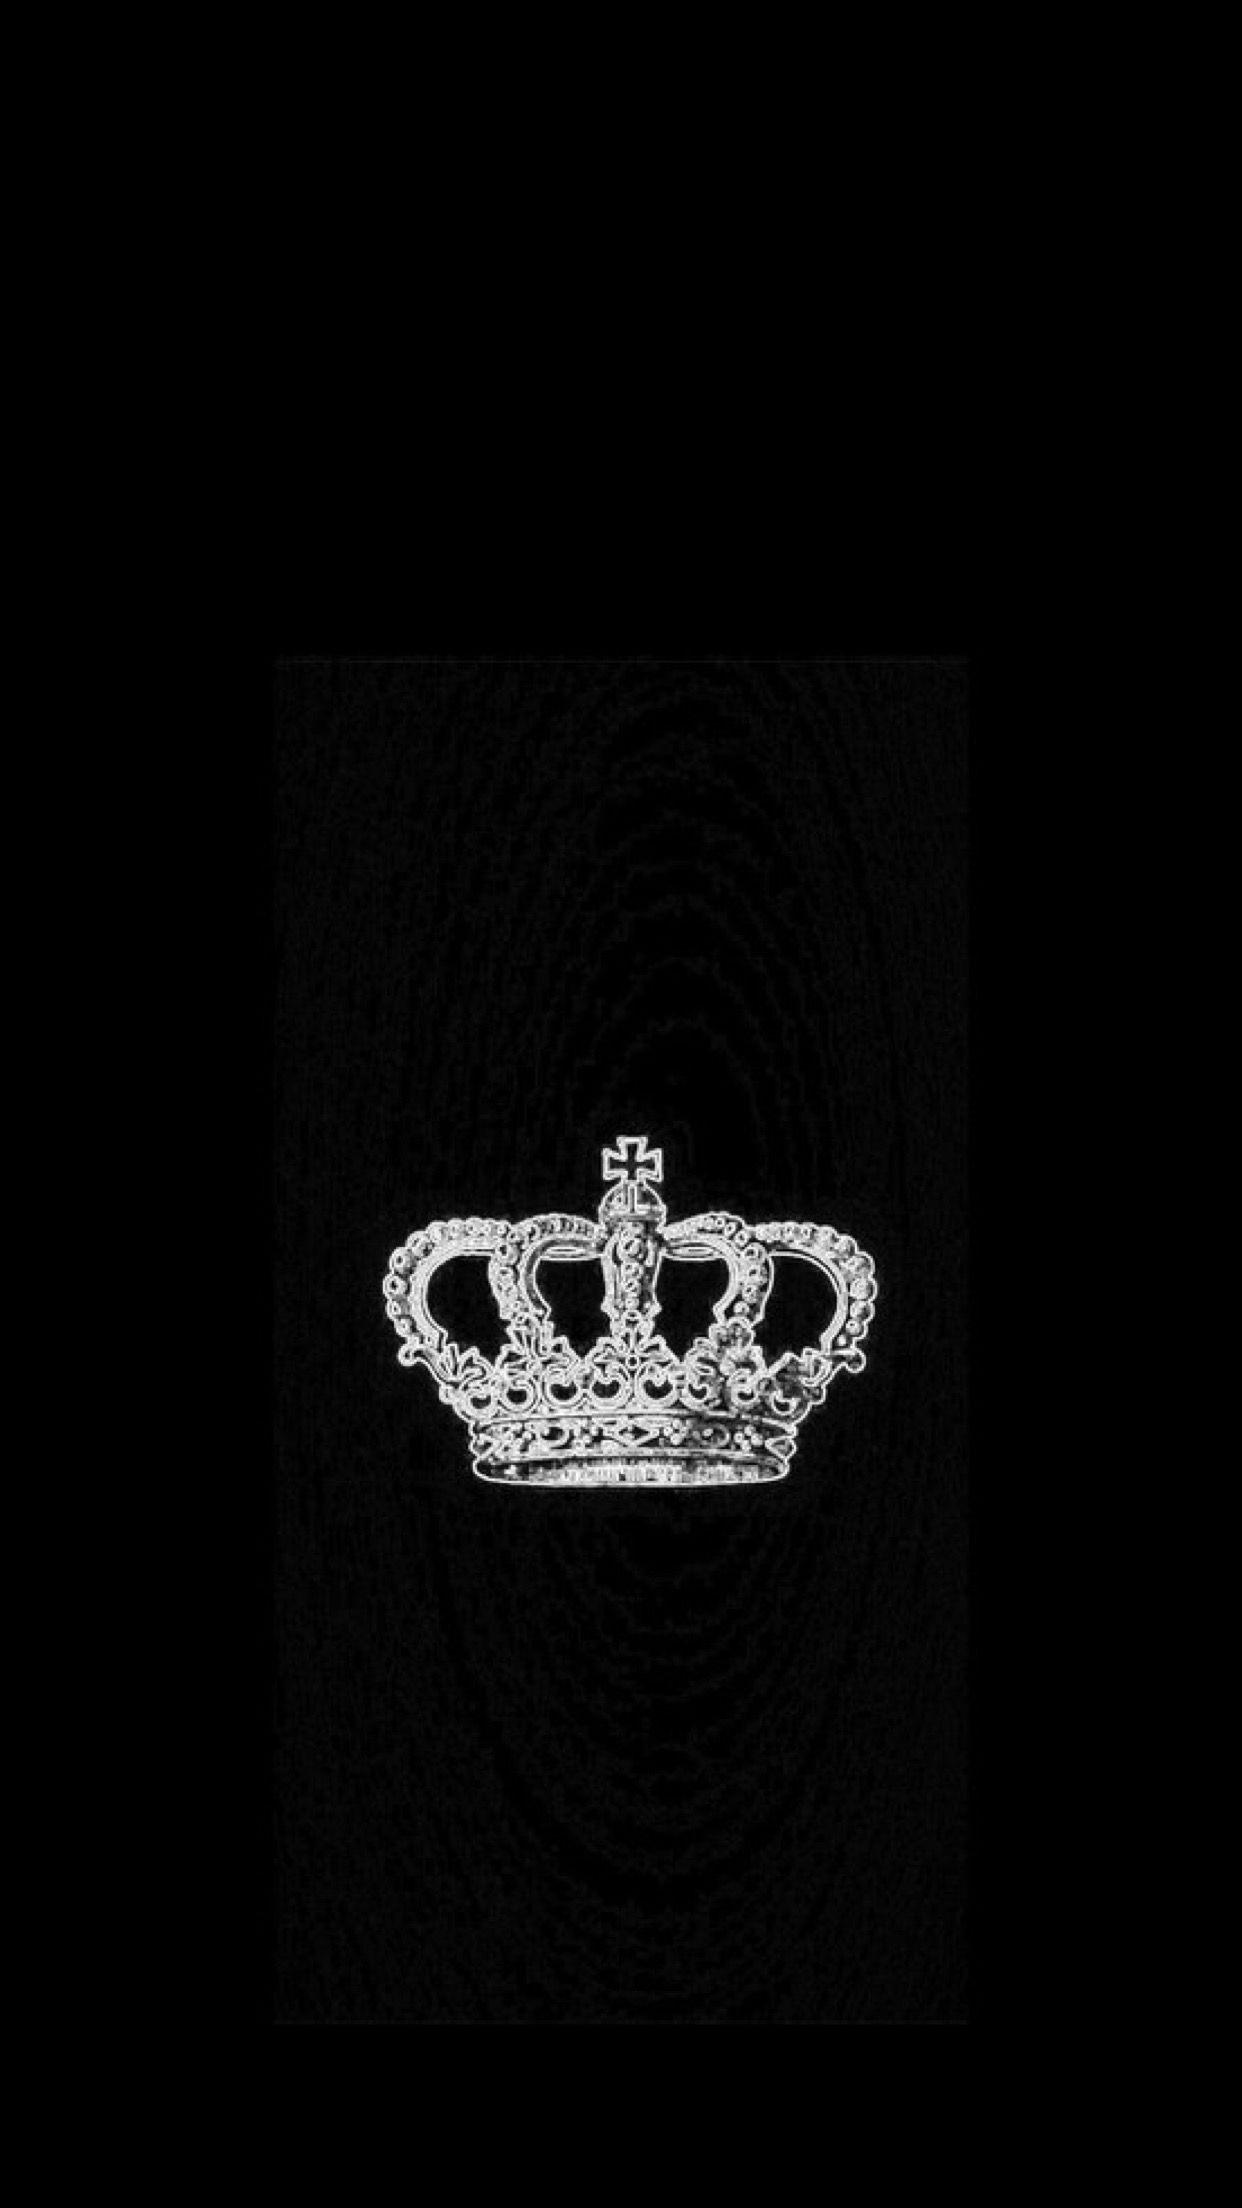 King's crown wallpapers, Regal backgrounds, Royal headgear, Crown images, 1250x2210 HD Phone